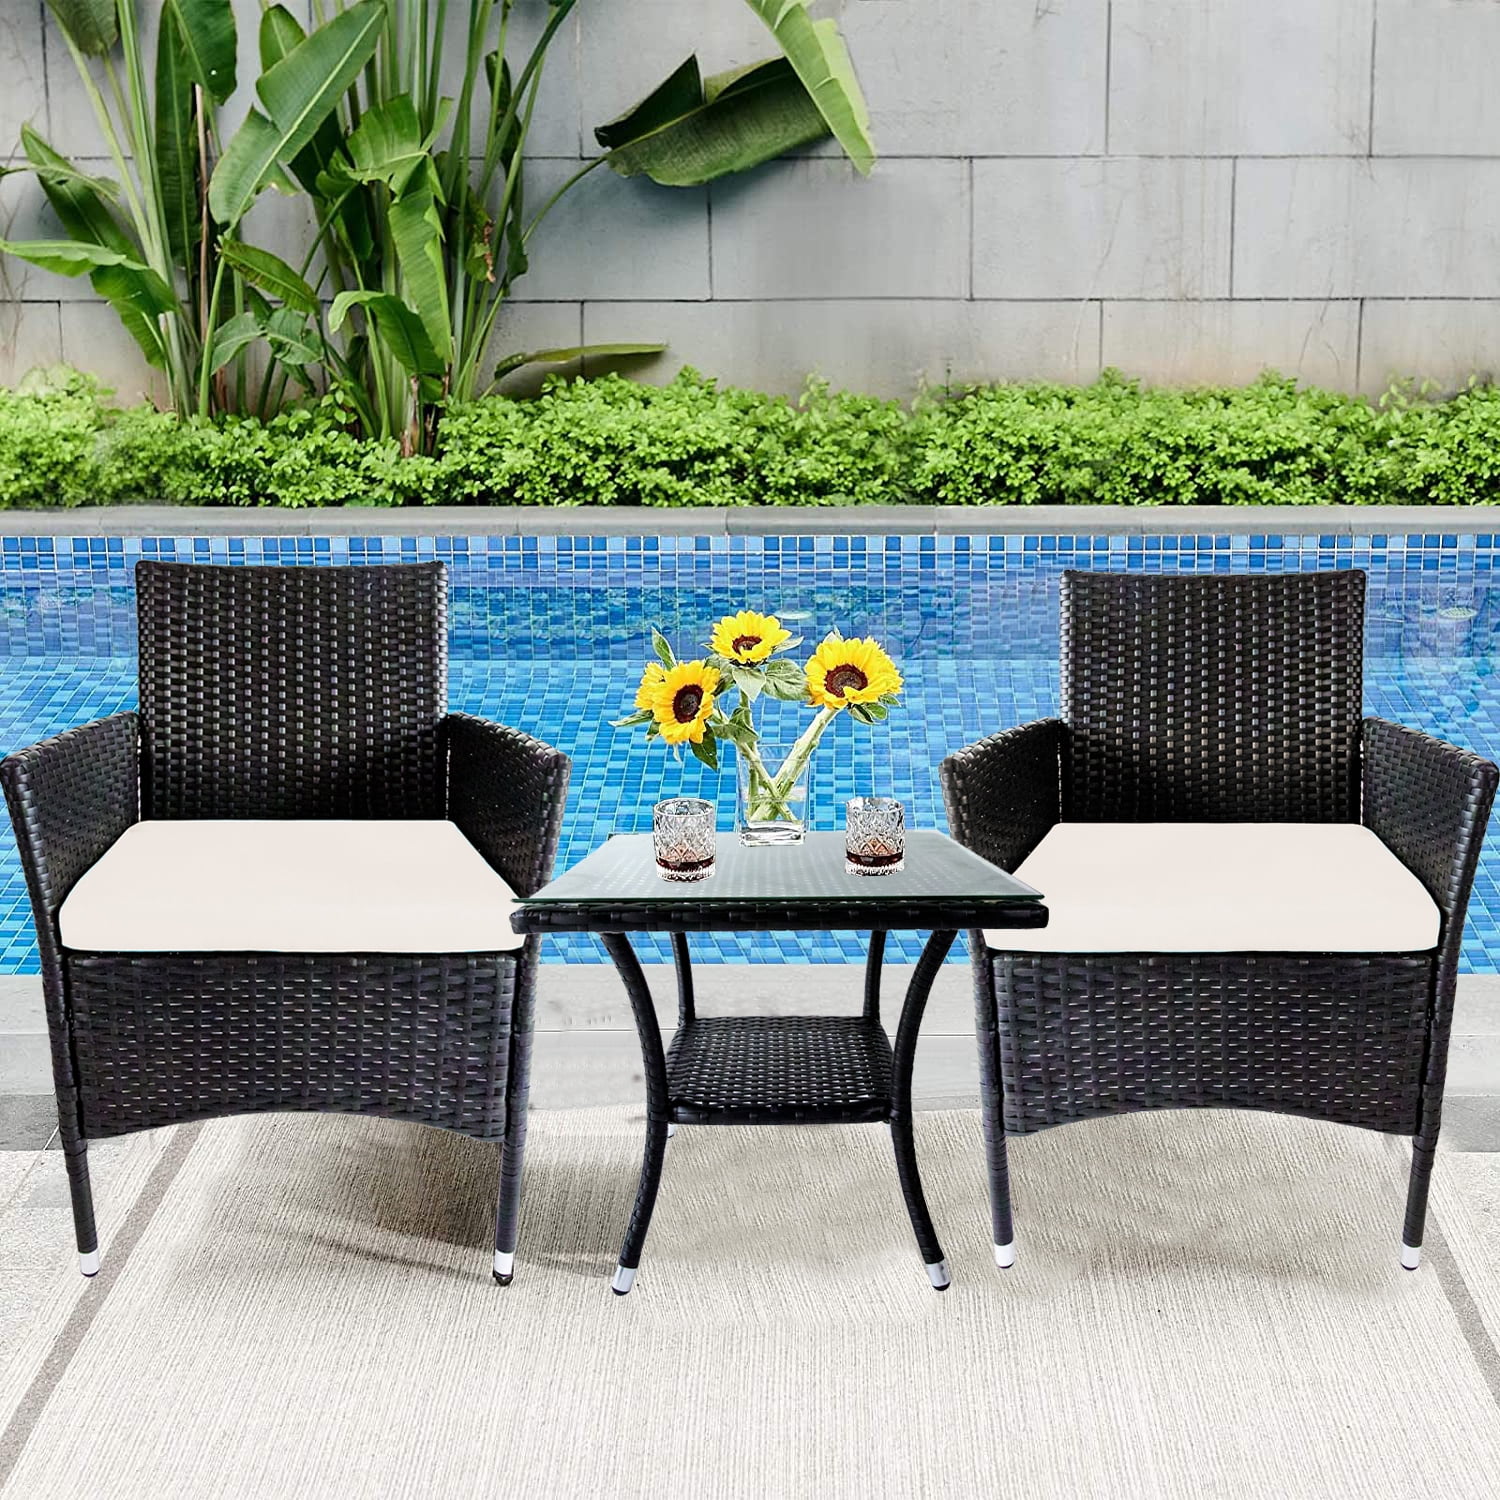 Details about   Wicker Patio Chairs Set of 2 Removable Cushion Outdoor Chairs Rattan Armchair 